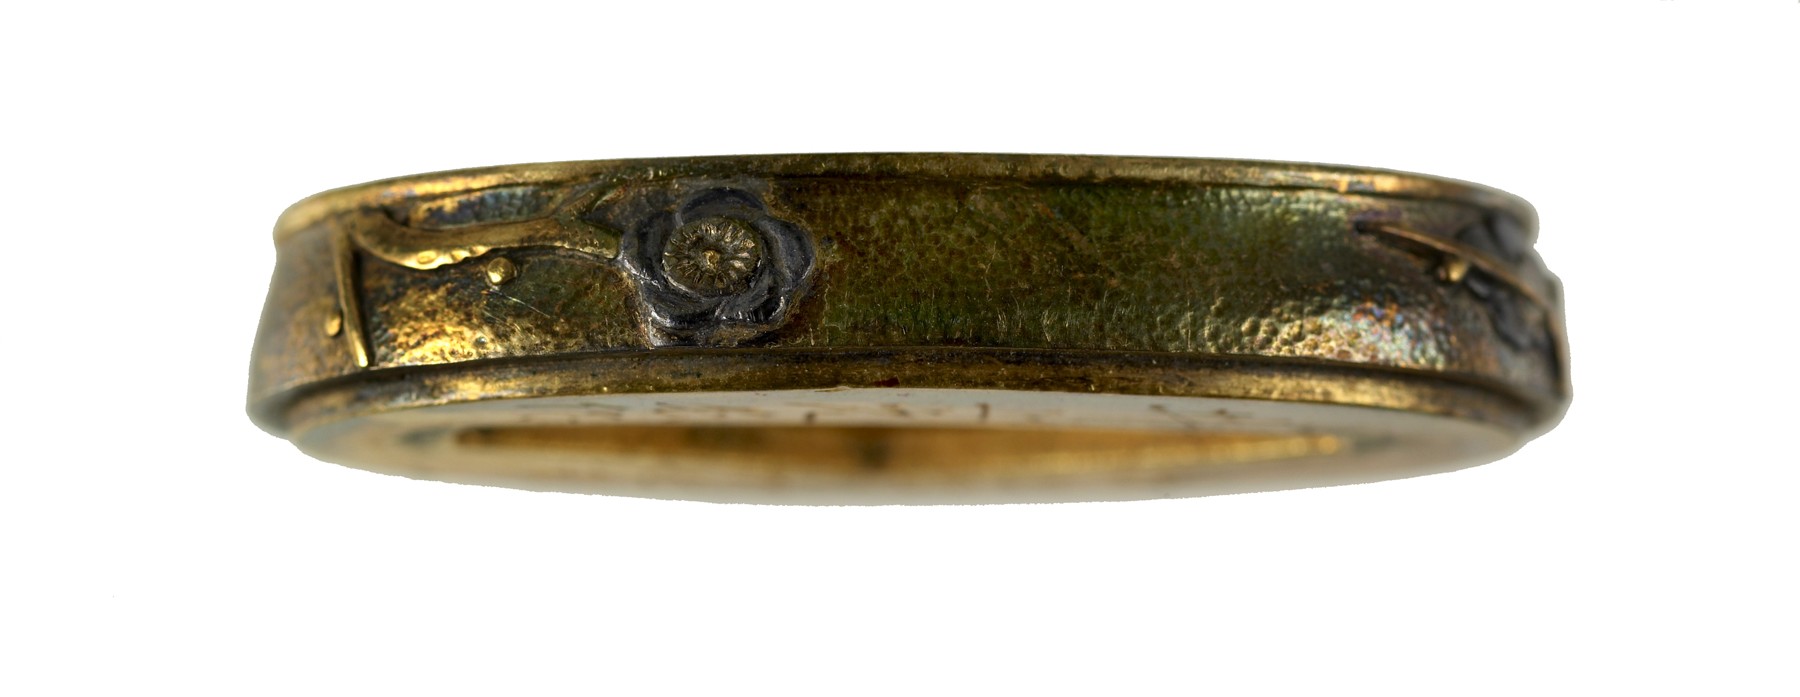 Image for Fuchi with Plum Tree Branches